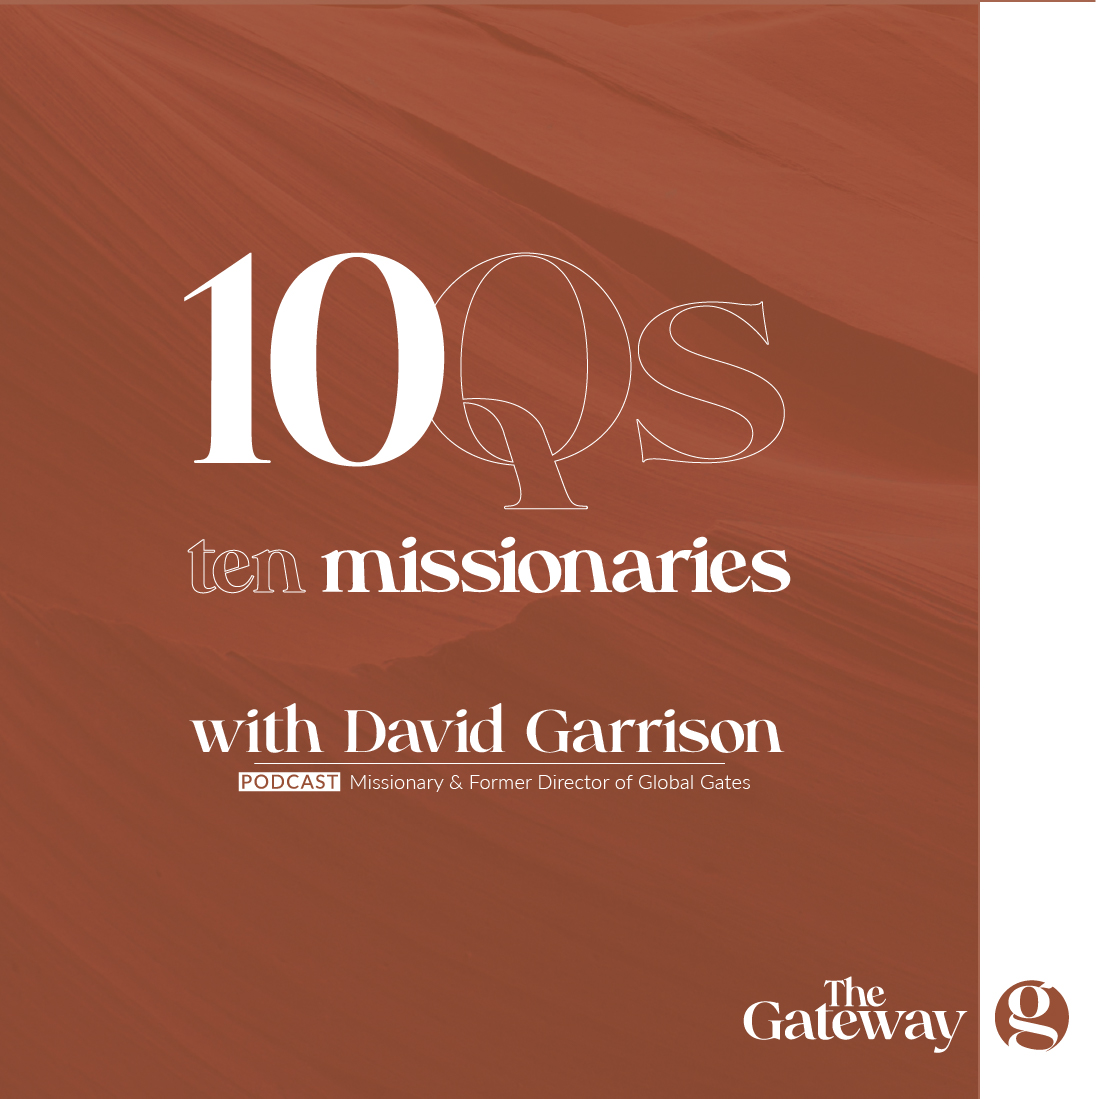 David Garrison, a Gateway alumni, missionary in Hong Kong, and former Global Gates director, shares about seeing lostness at a young age and wanting to serve in a place with little gospel access. 🎧️ Listen on any podcast platform OR at thegateway.press/podcasts